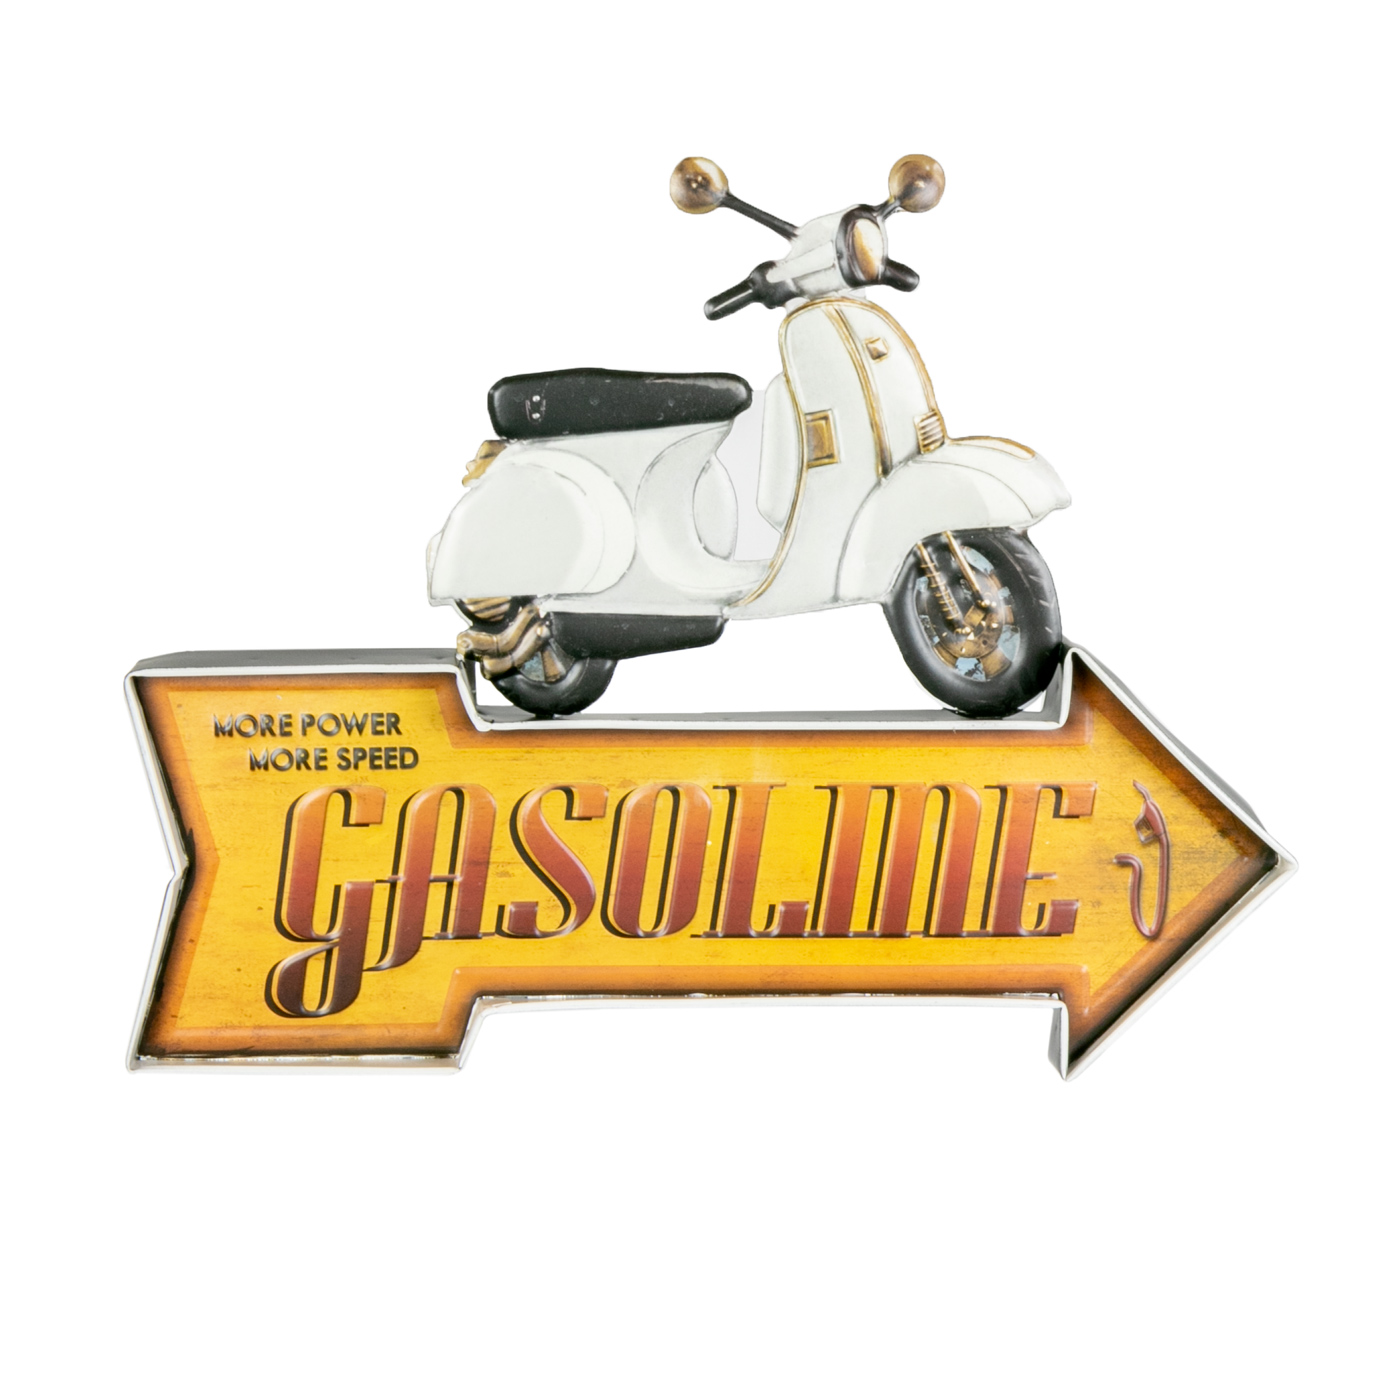 Scooter Gasoline: more Power - more Speed